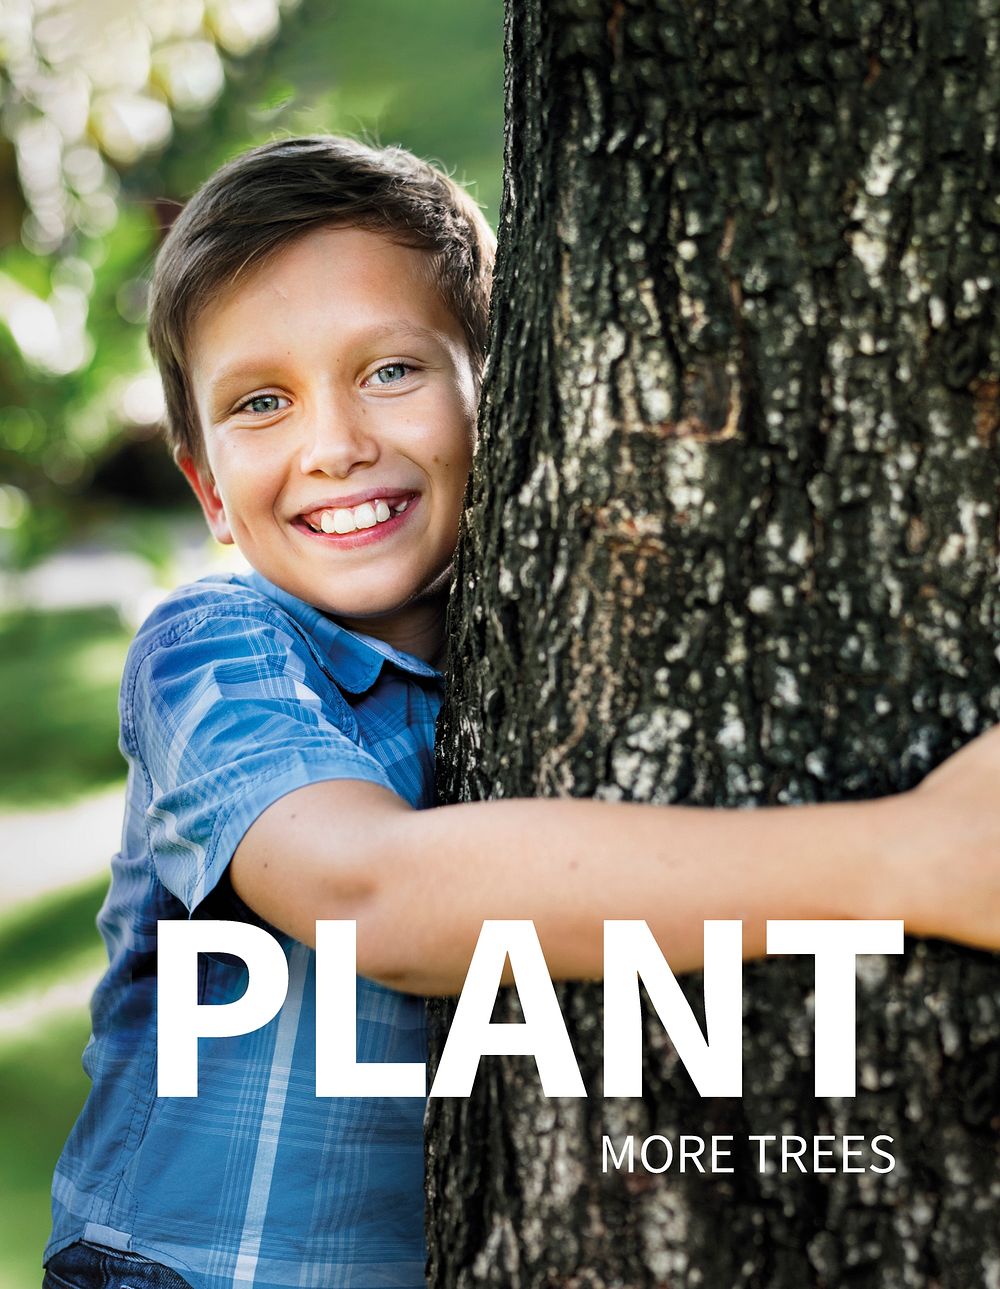 Environment poster with plant more trees quote